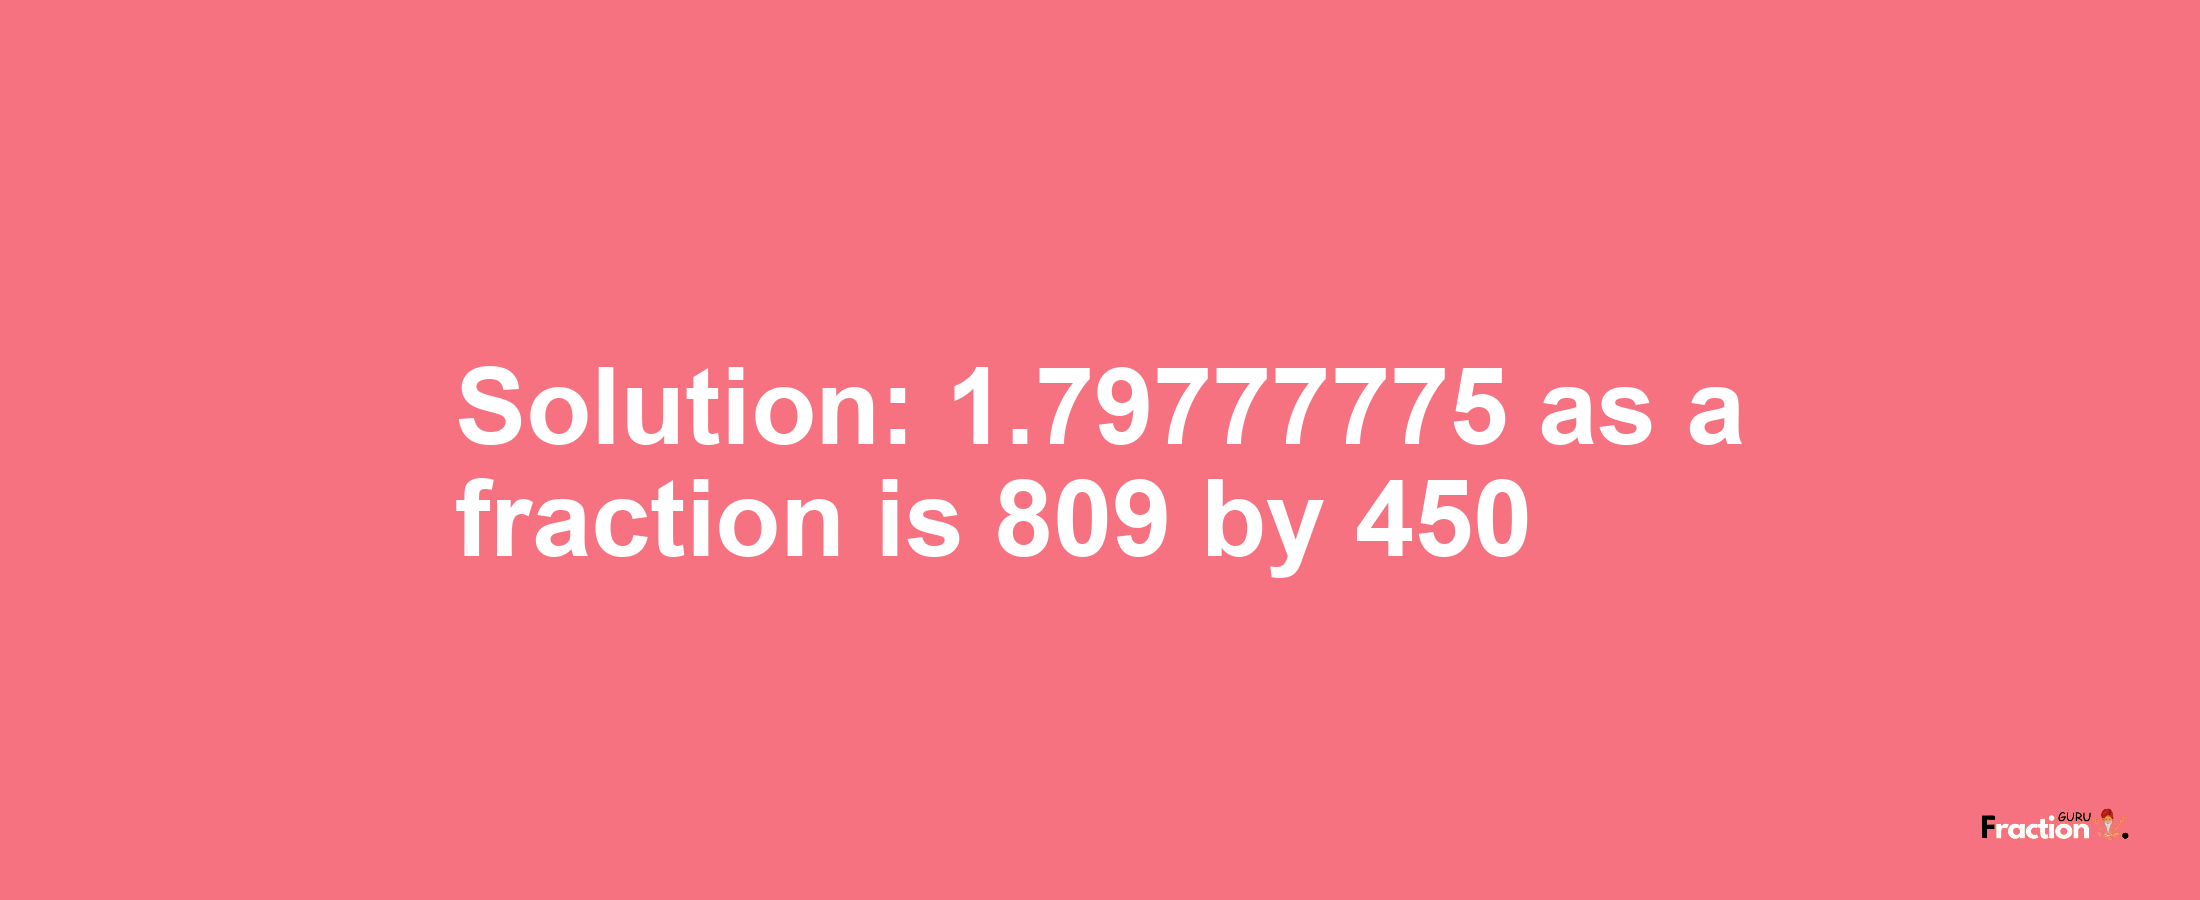 Solution:1.79777775 as a fraction is 809/450